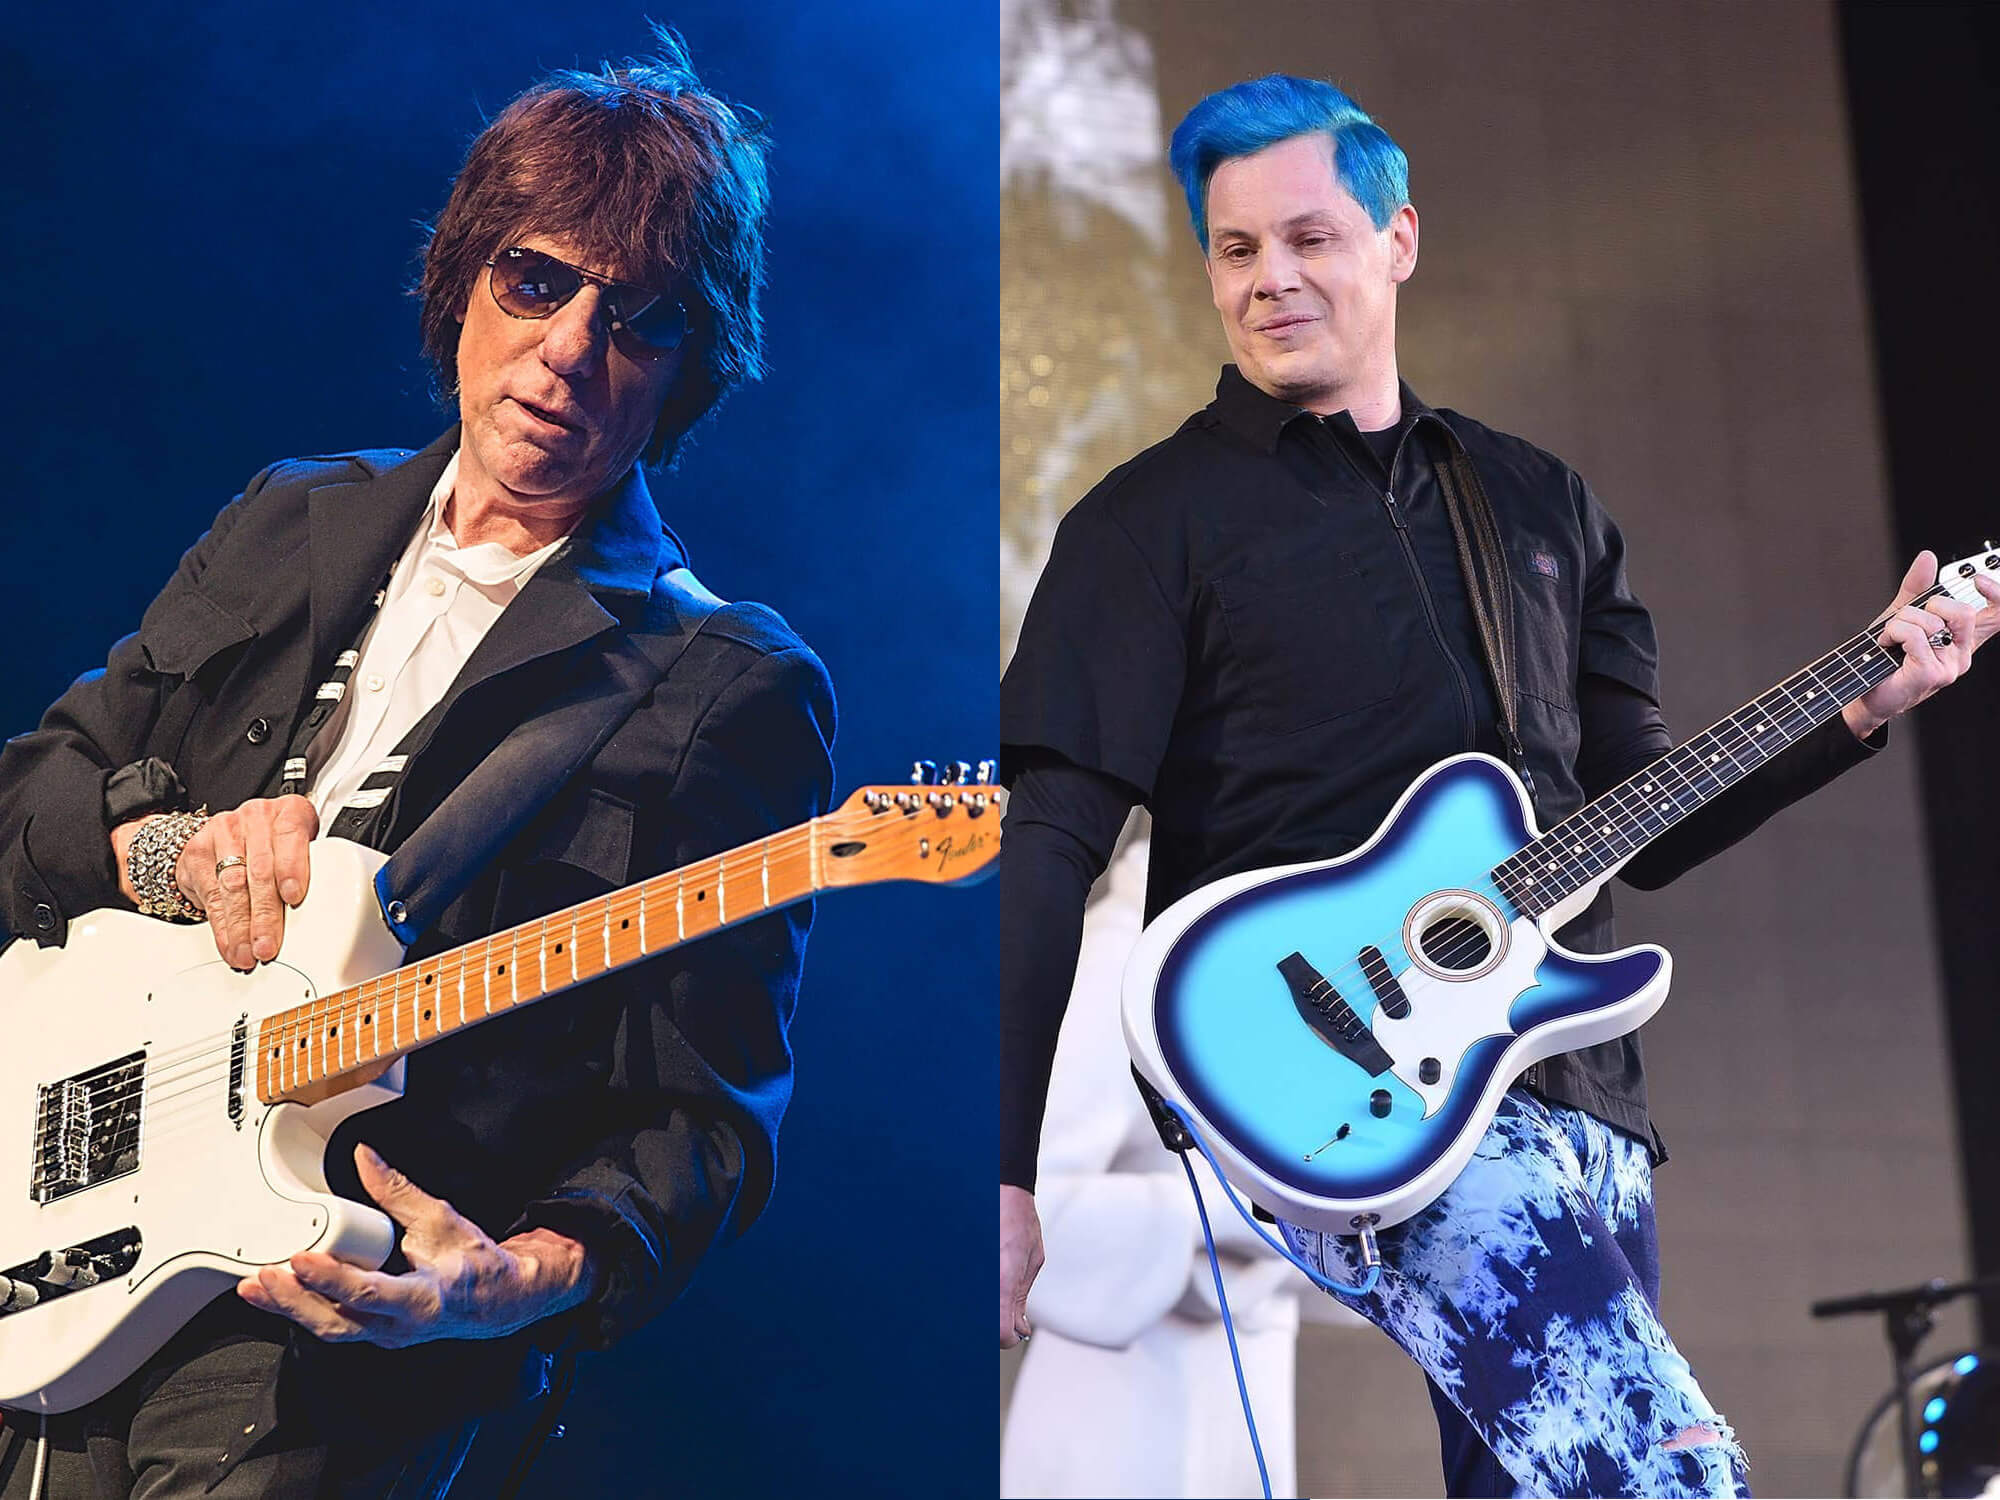 Jeff Beck and Jack White